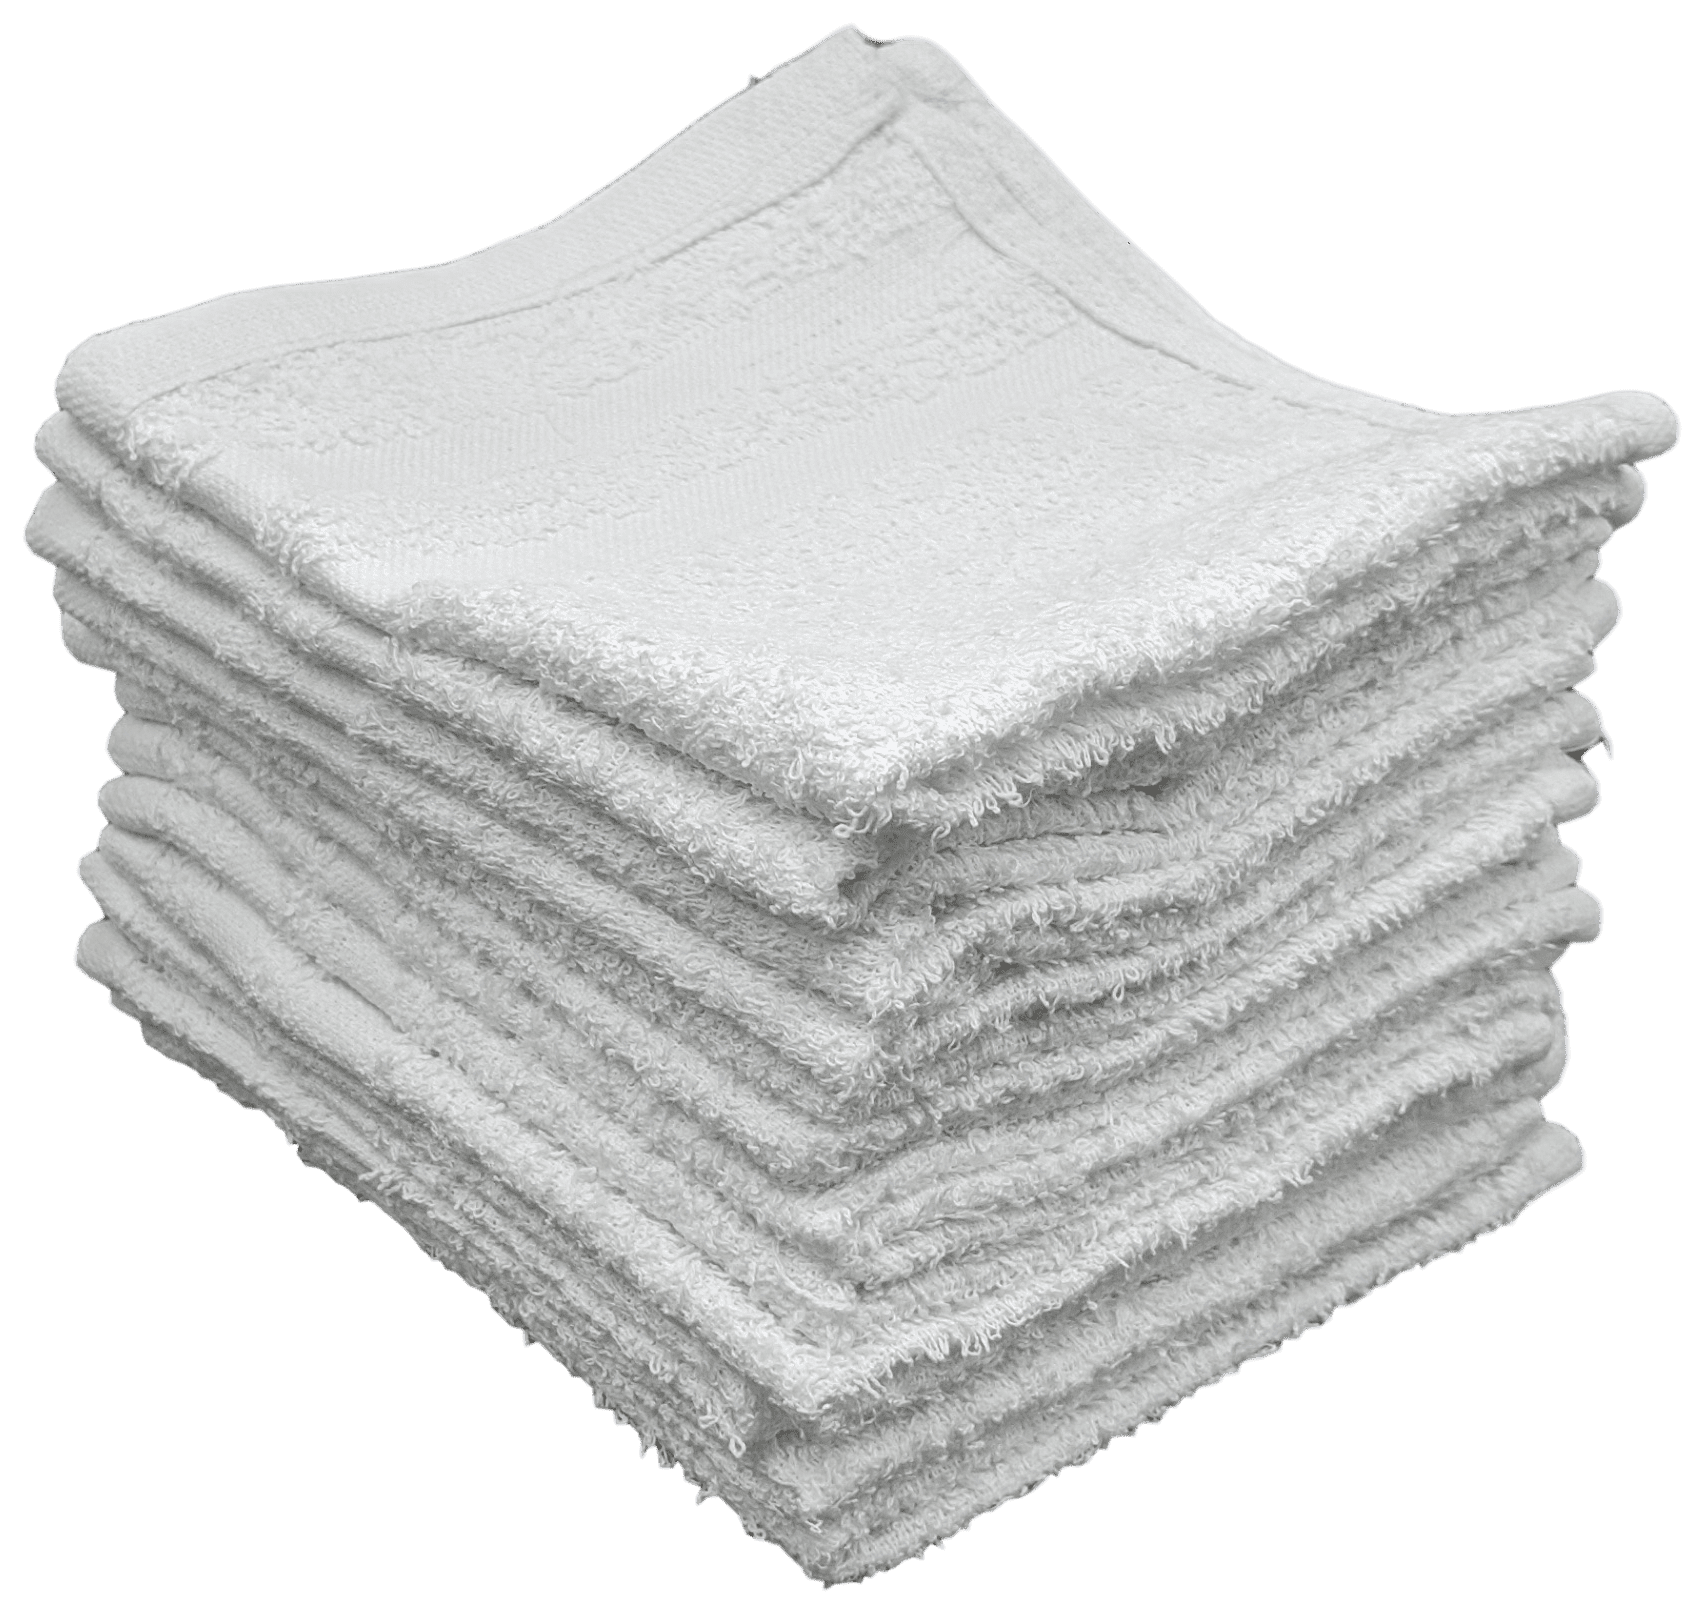 White Cotton Rags Ideal For Staining. Prevents dripping and blotching